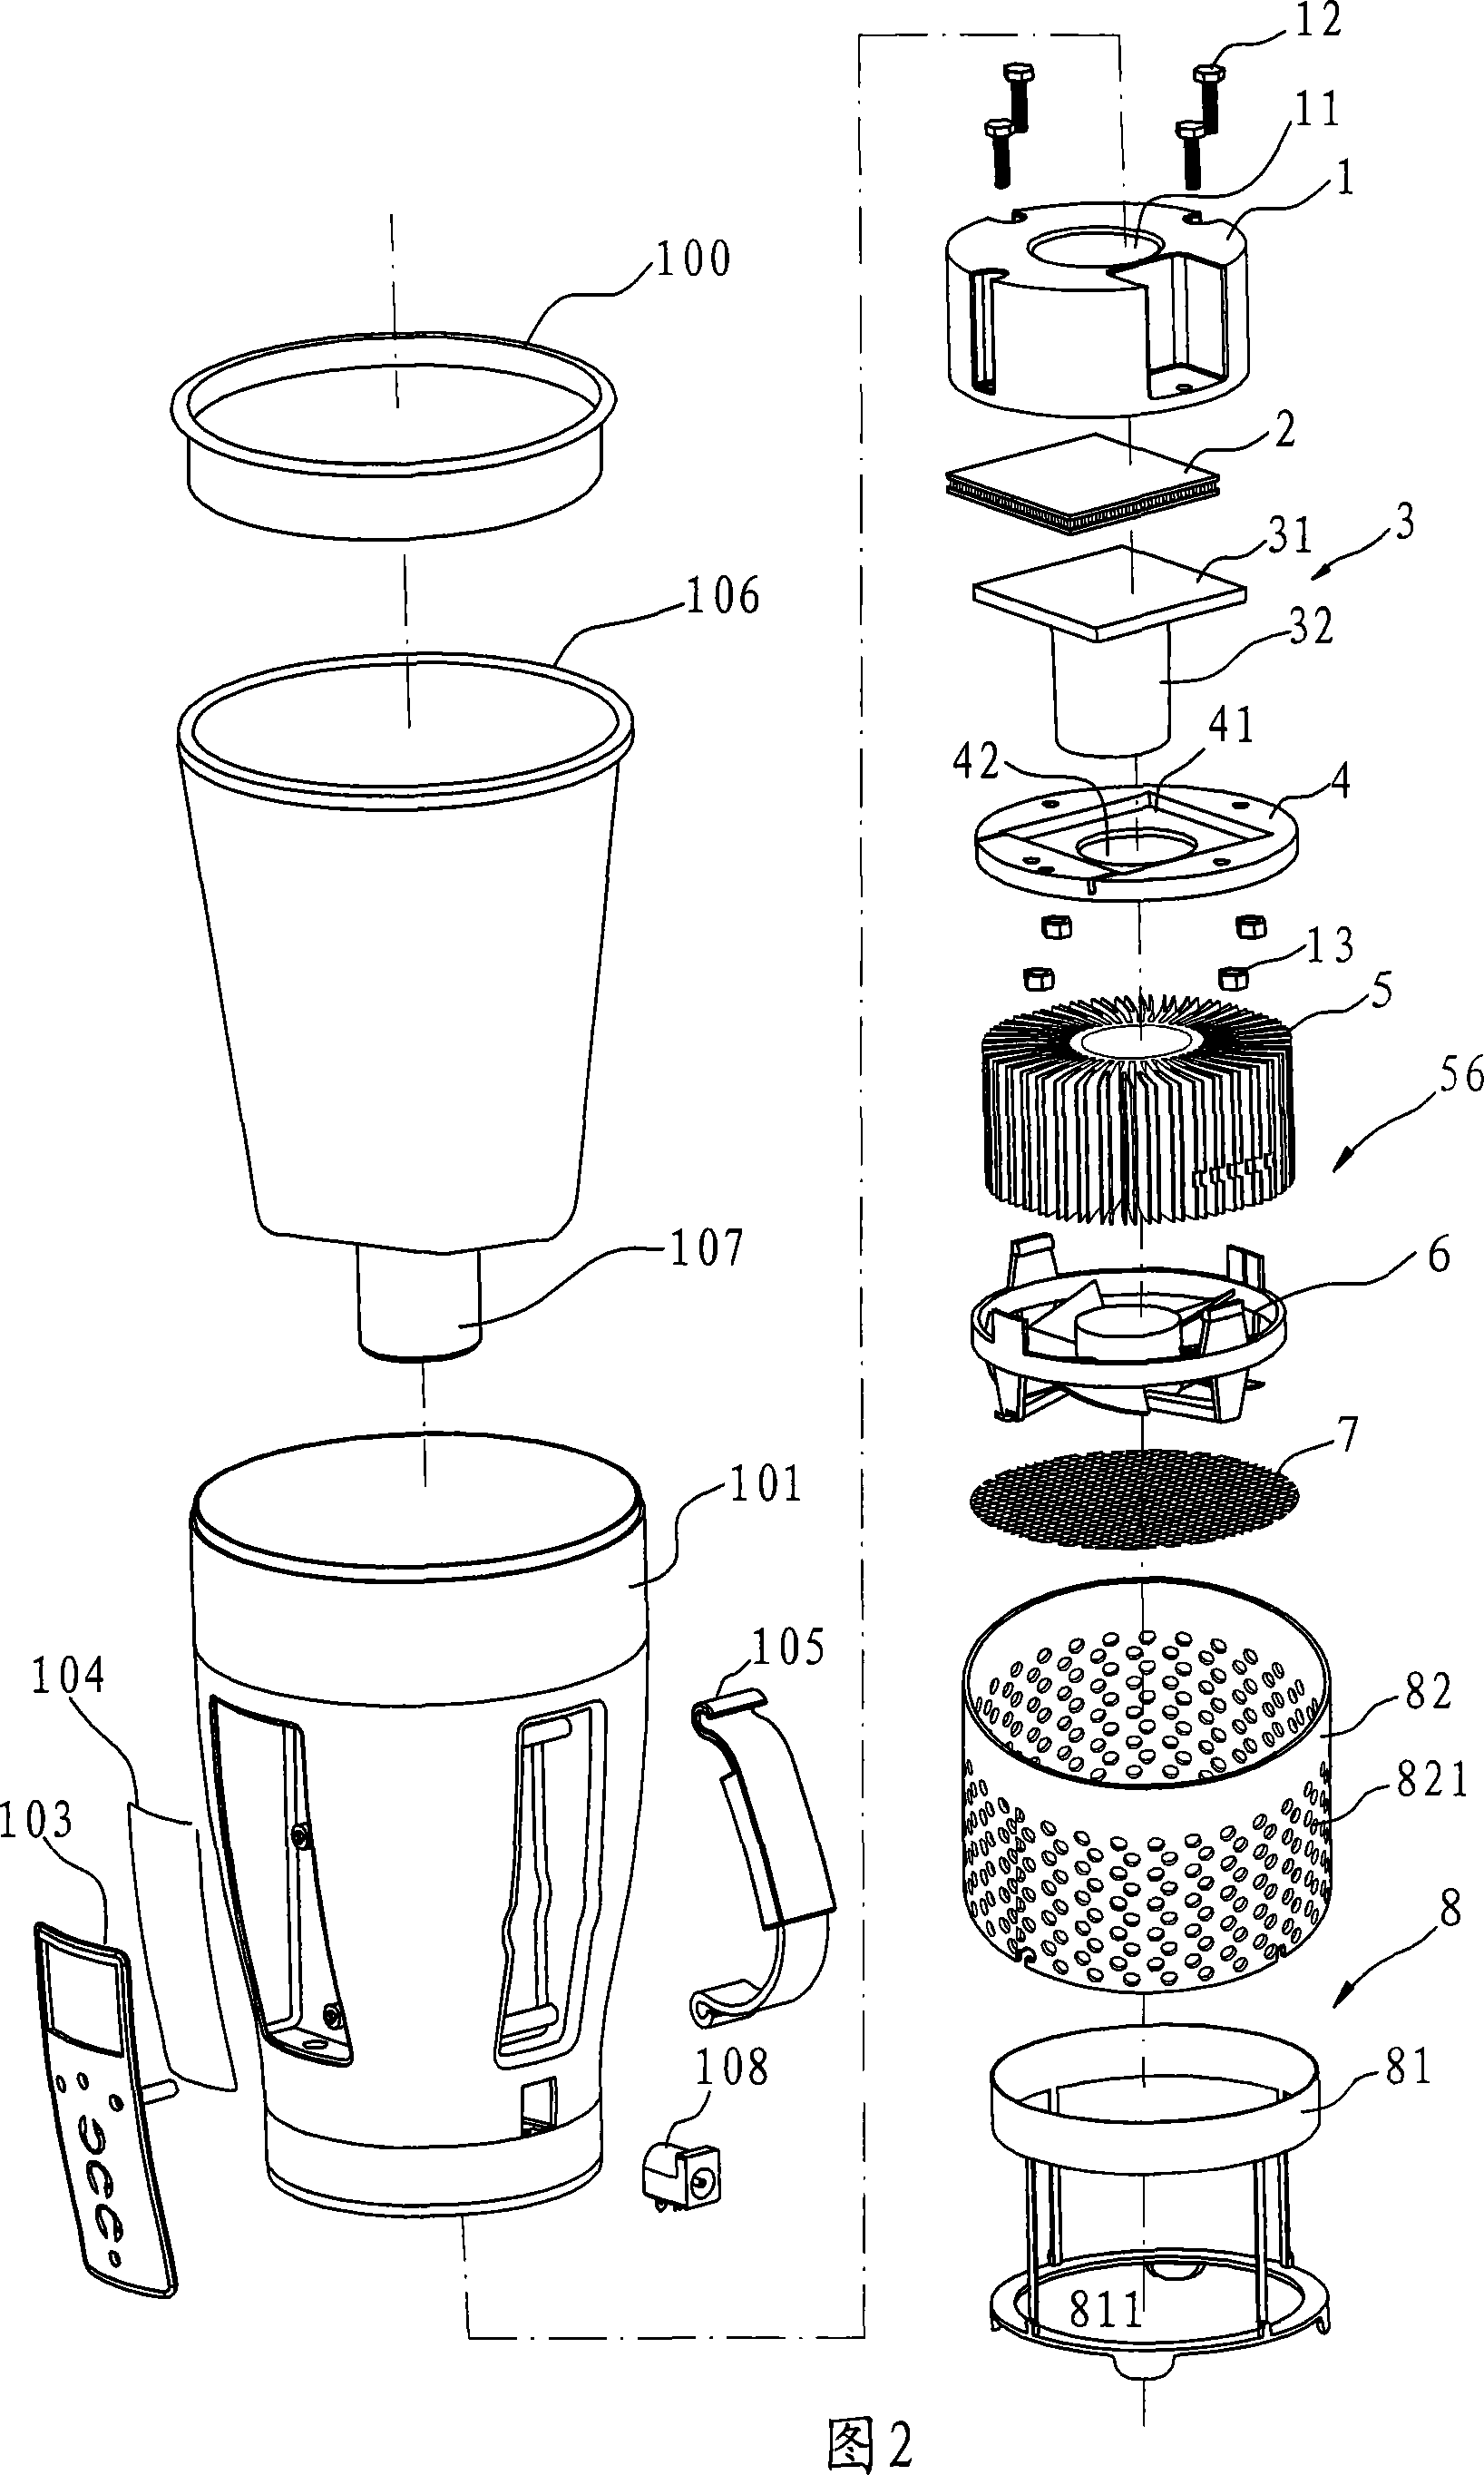 Cooling-heating cup